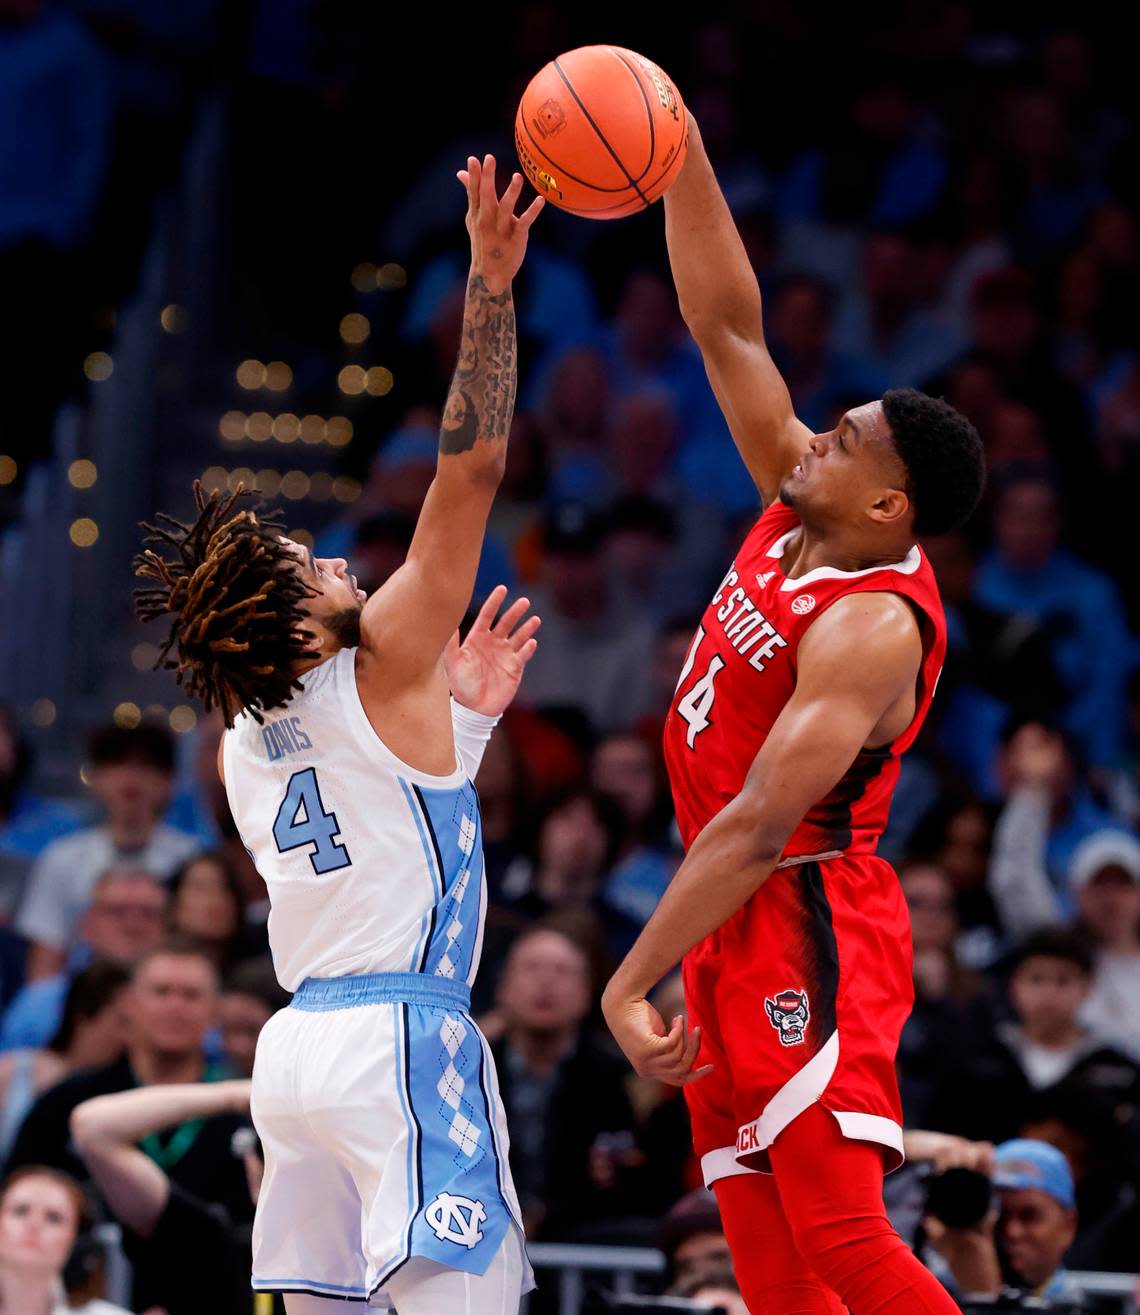 N.C. State’s Casey Morsell (14) blocks the shot by North Carolina’s RJ Davis (4) during the second half N.C. State’s 84-76 victory over UNC in the championship game of the 2024 ACC Men’s Basketball Tournament at Capital One Arena in Washington, D.C., Saturday, March 16, 2024.